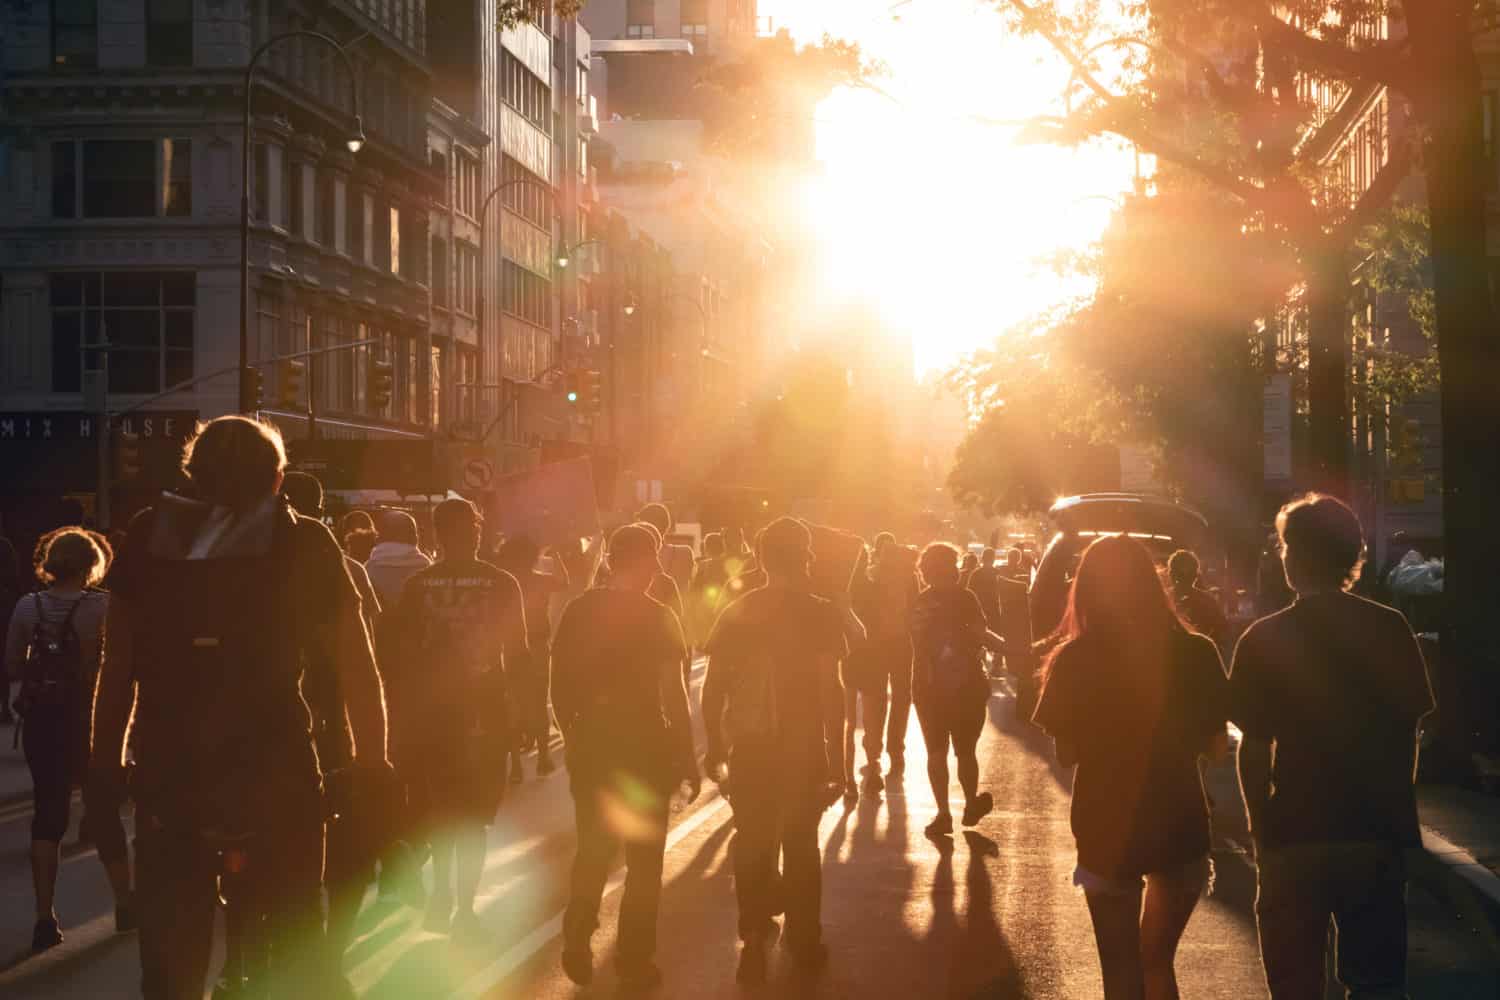 NEW YORK CITY, USA - JUNE 12, 2020: Crowd of people walk into the light of sunset at a peaceful protest march on 14th Street in Manhattan.